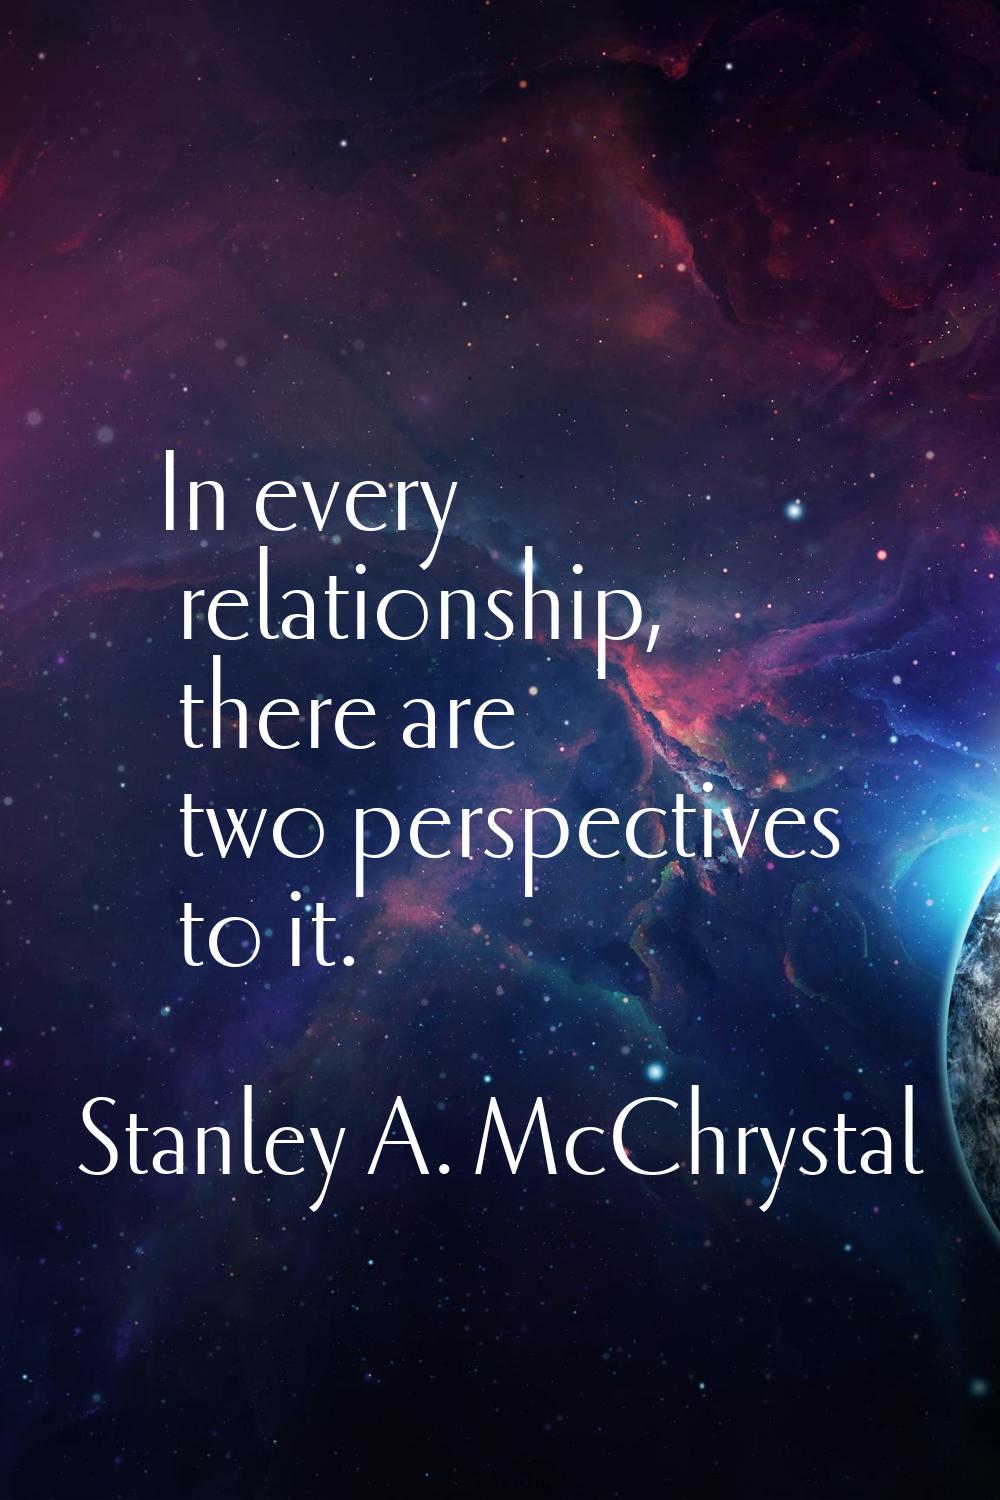 In every relationship, there are two perspectives to it.